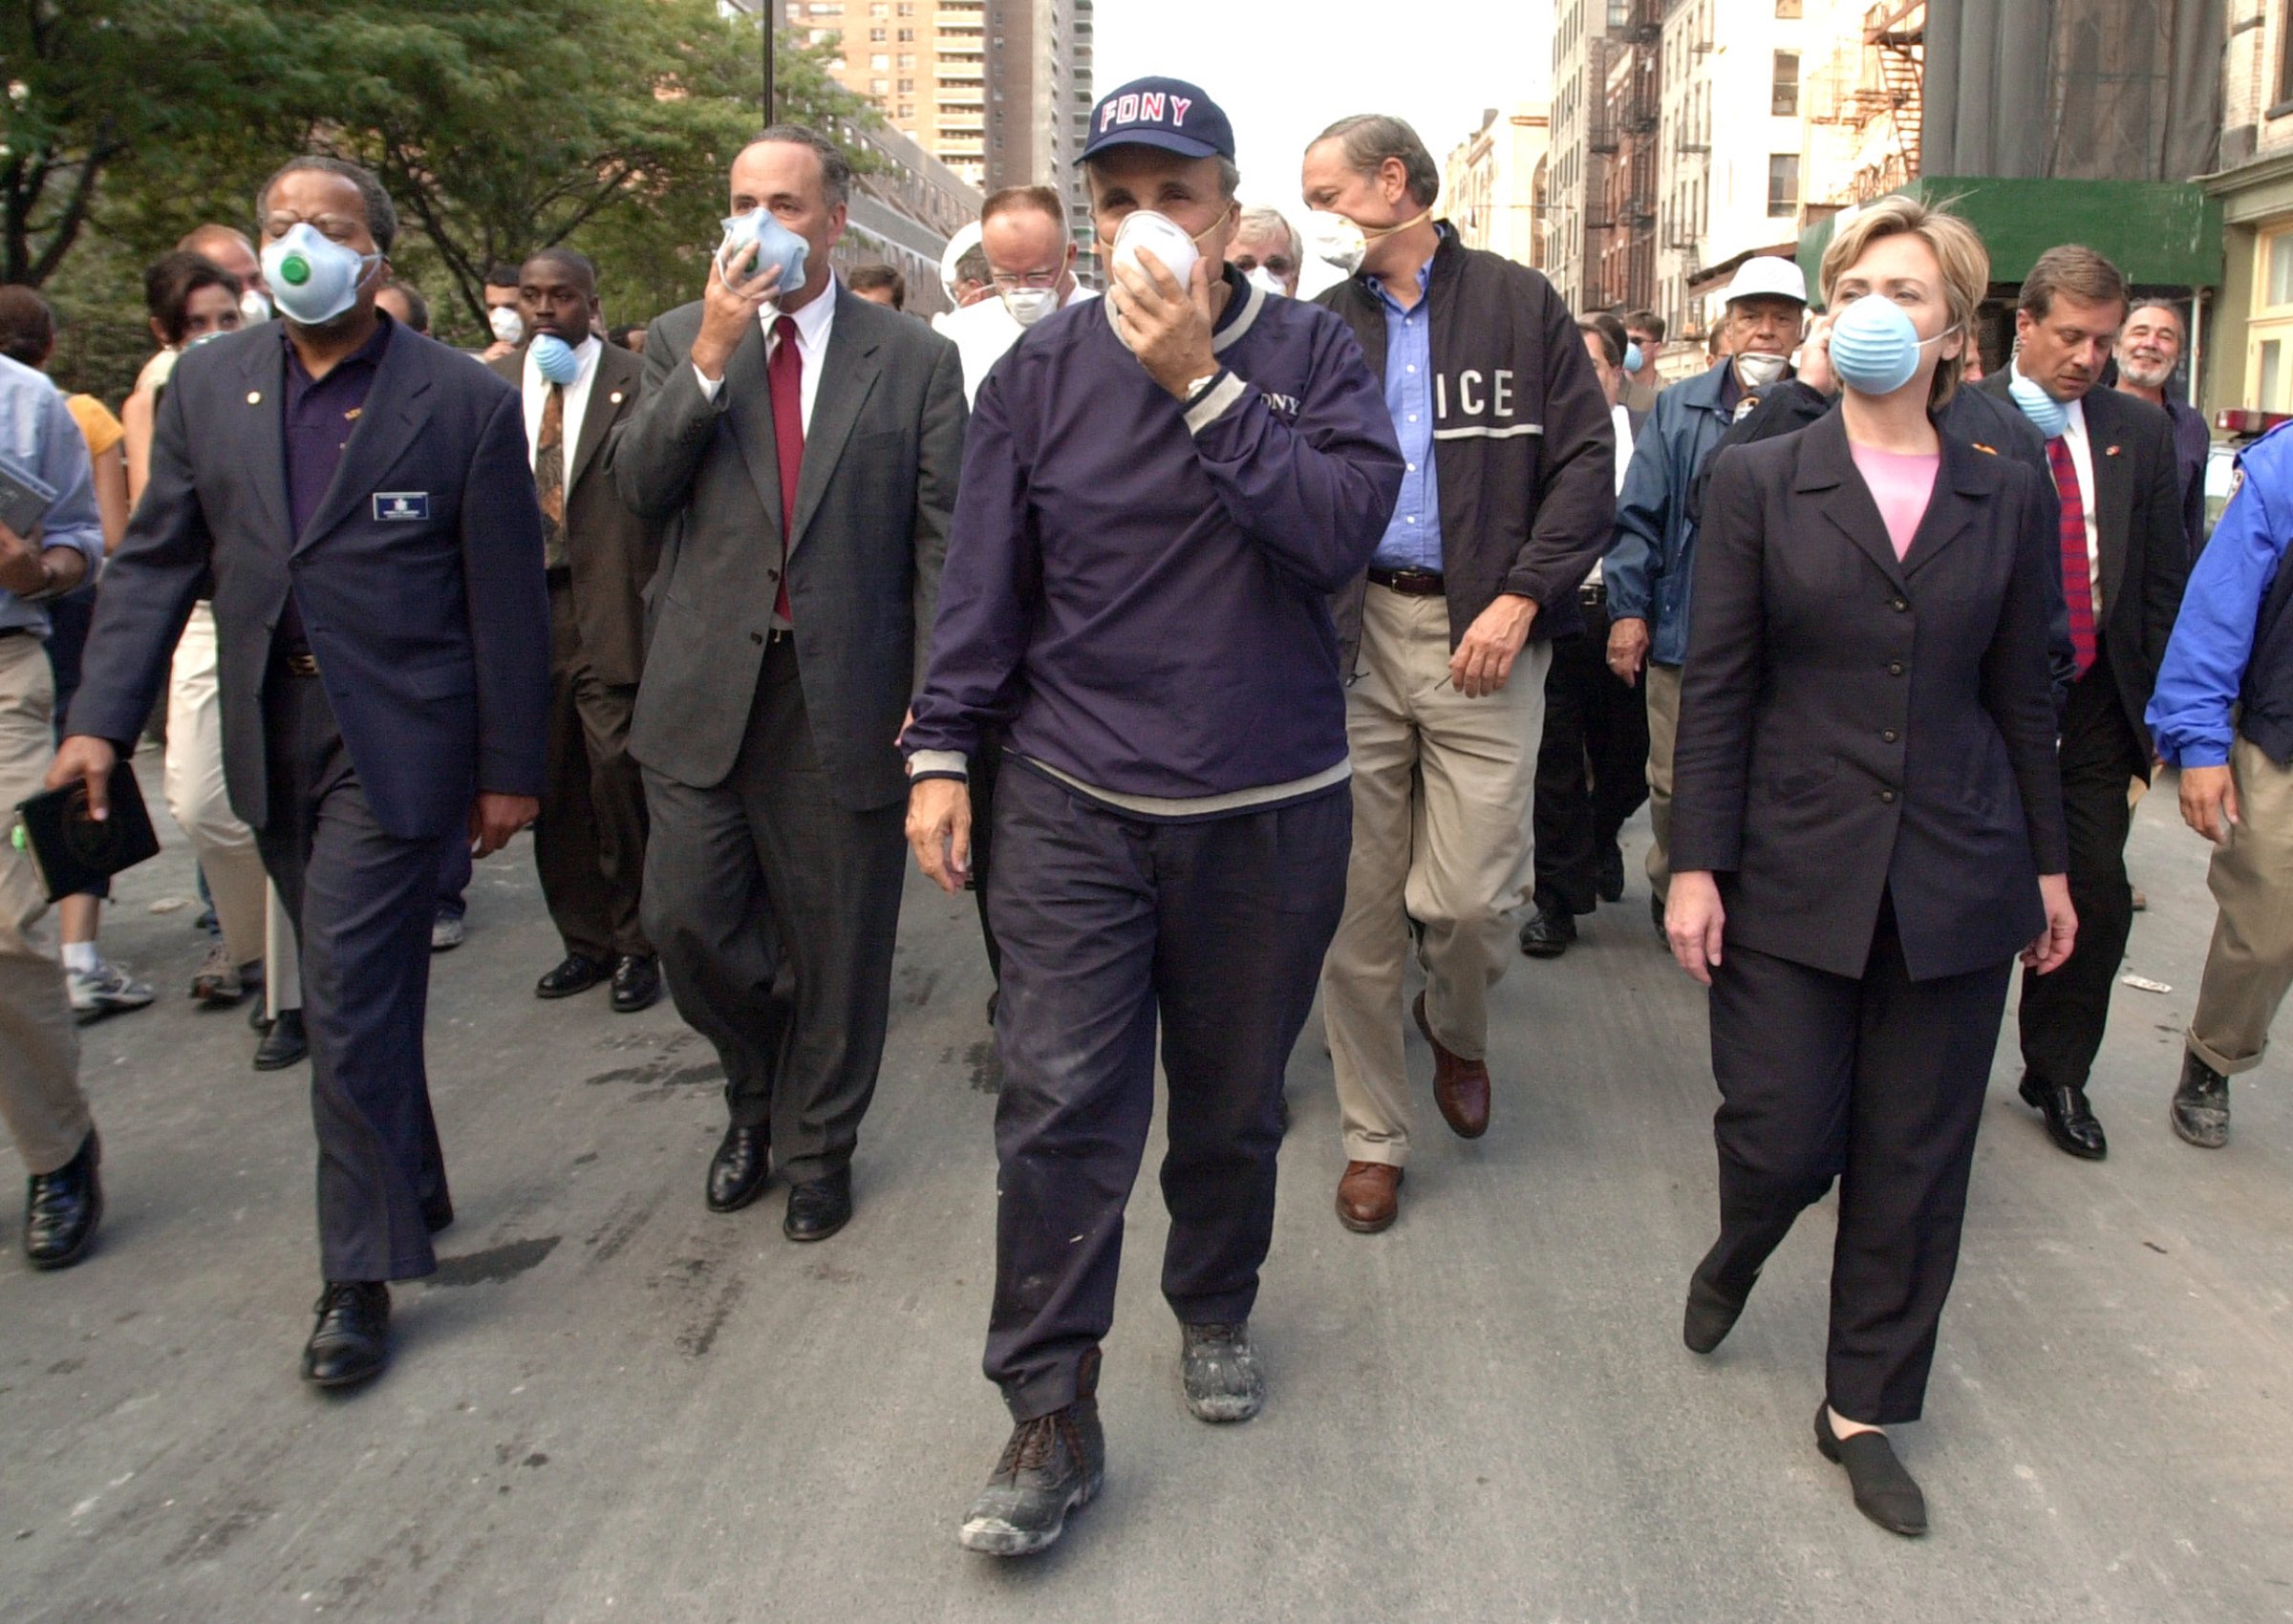 NEW YORK, NY - SEPTEMBER 12: New York City Mayor Rudolph Giuliani (C) leads US Senator Charles Schumer, R-NY (2nd L), New York Governor George Pataki (2nd R) and US Senator Hillary Rodham Clinton, D-NY (R), on a tour of the site of the World Trade Center disaster 12 September 2001 in New York. (Photo credit should read ROBERT F. BUKATY/AFP/Getty Images)